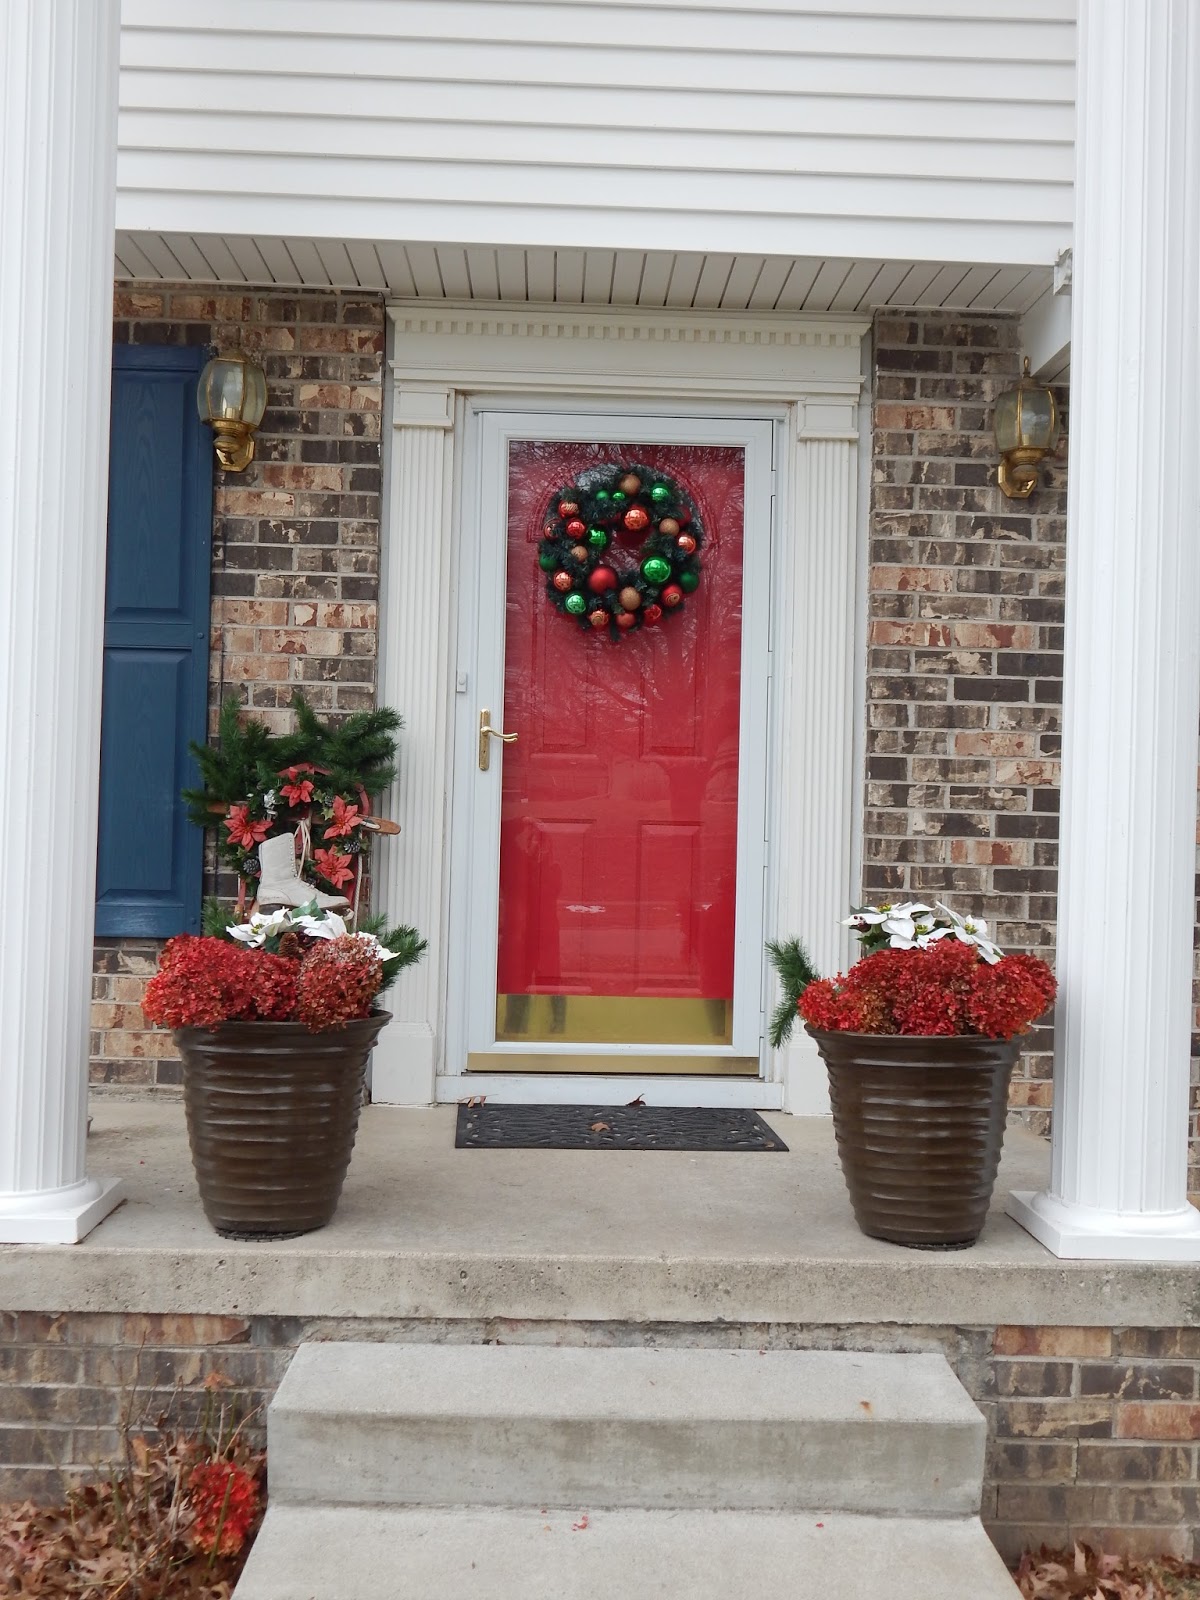 Beyond The Garden Gate: There's no place like home for the holidays